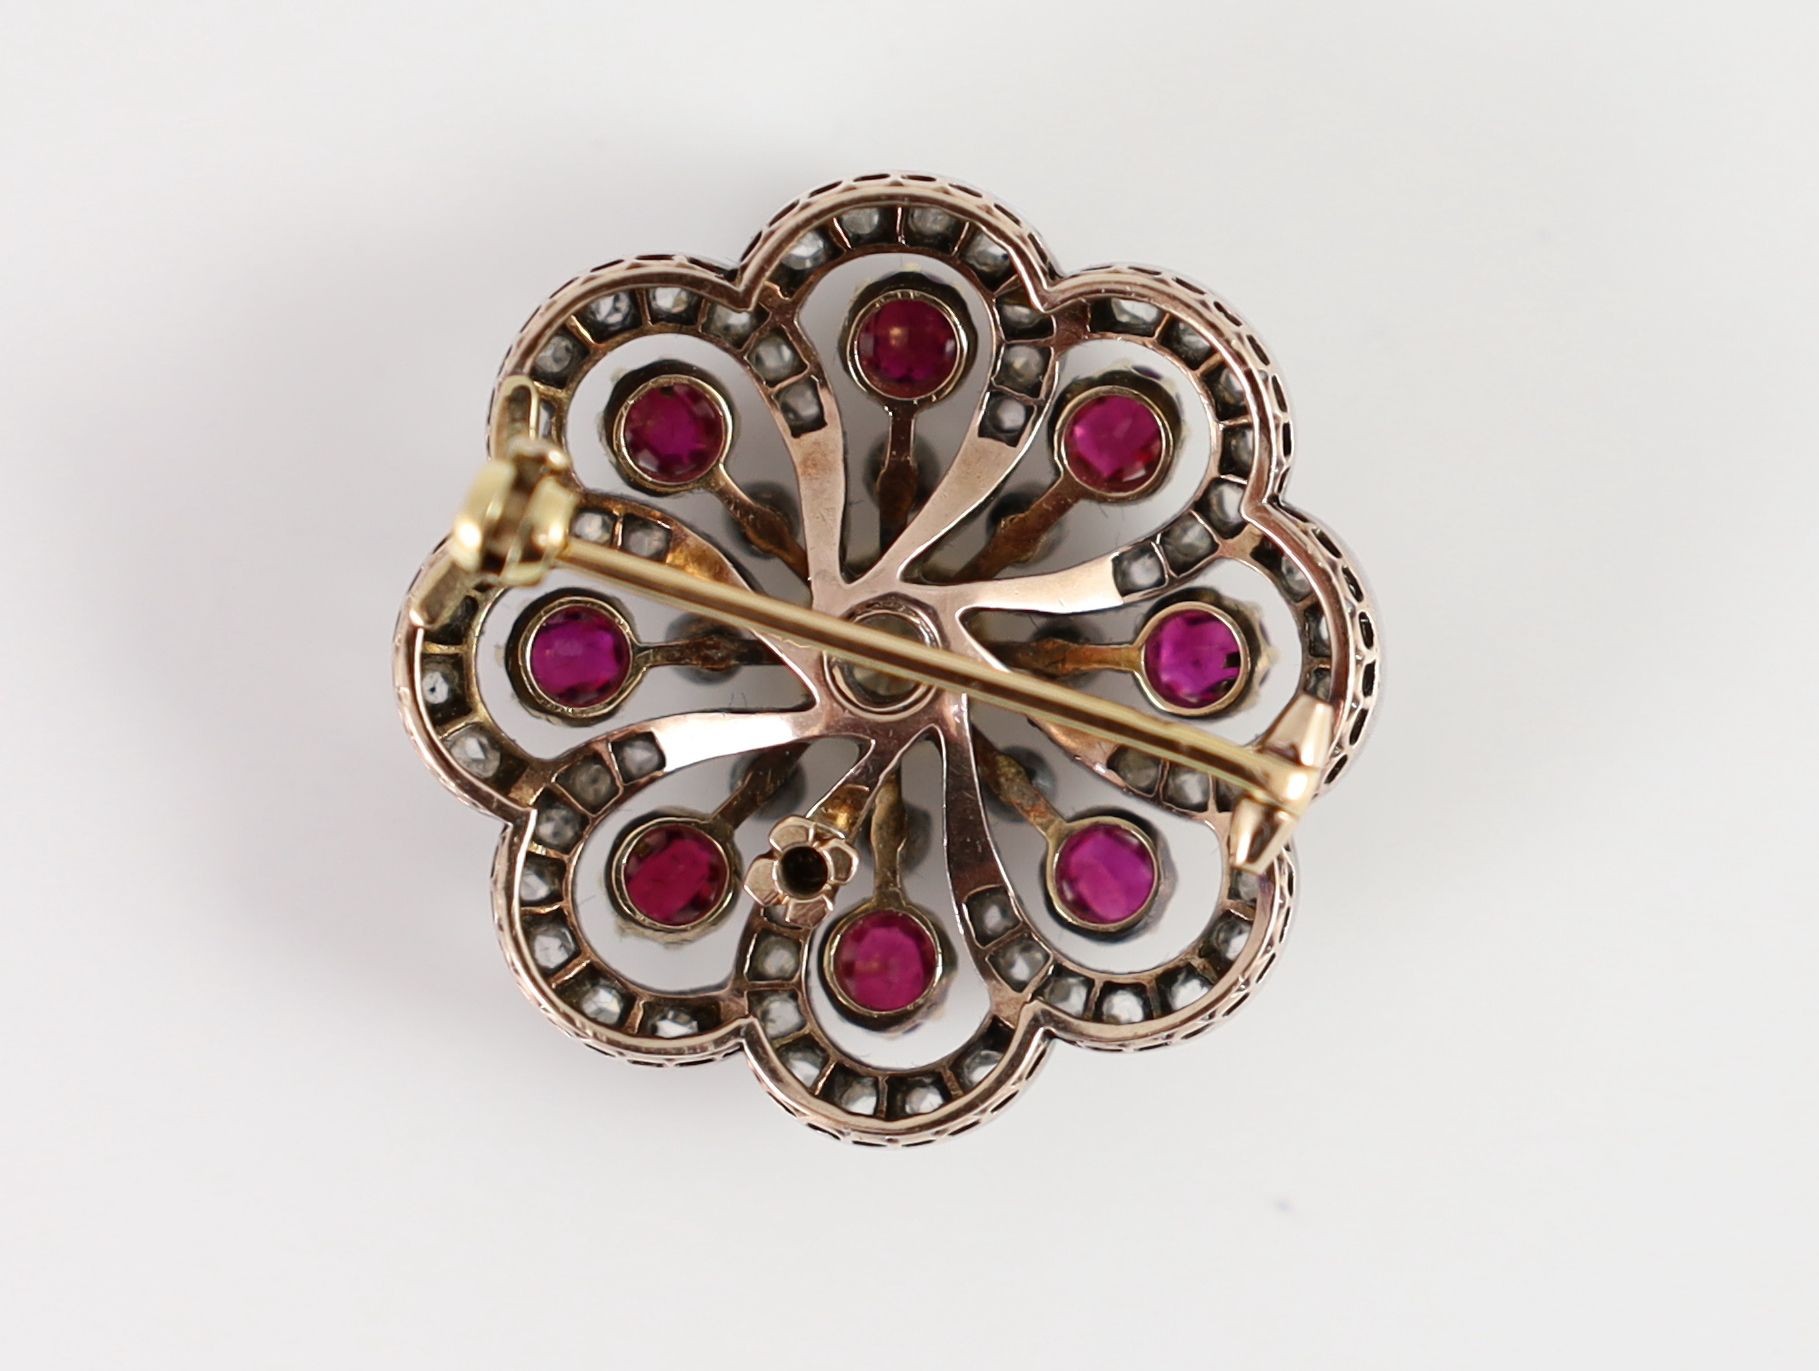 A late Victorian gold and silver, ruby and diamond set whorl shaped brooch